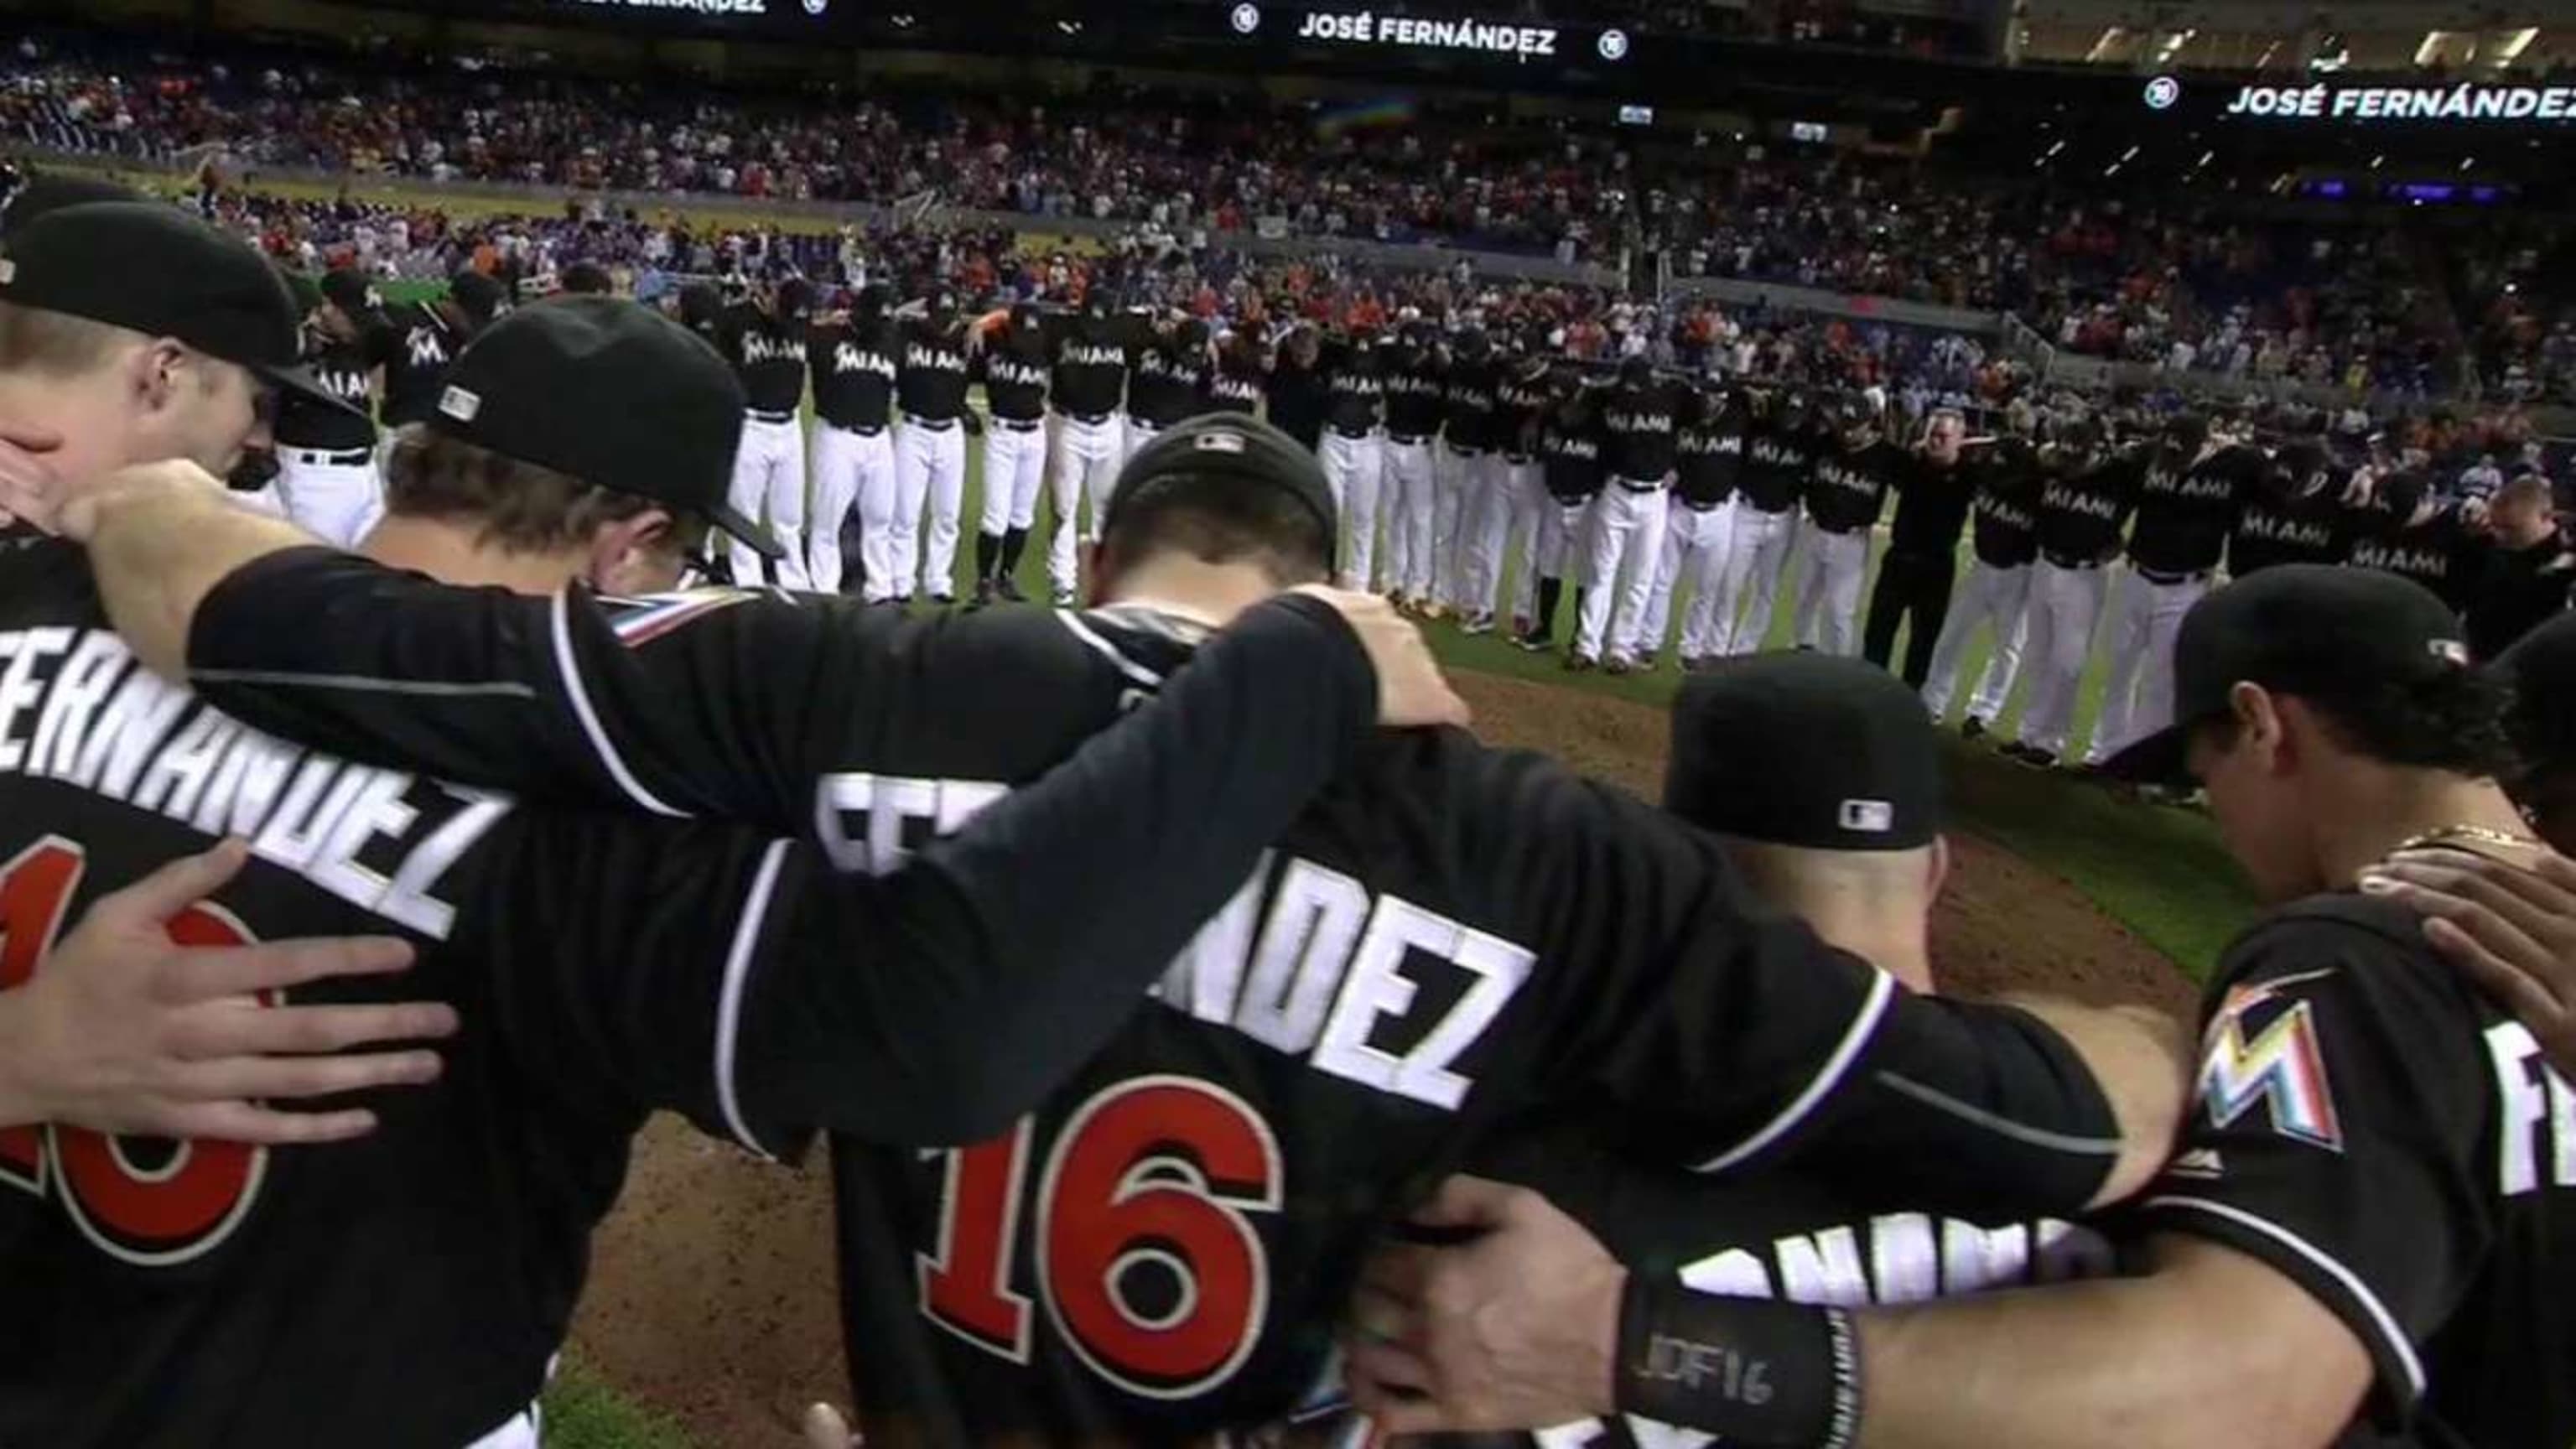 Miami Marlins remember Jose Fernandez in moving tribute at Marlins